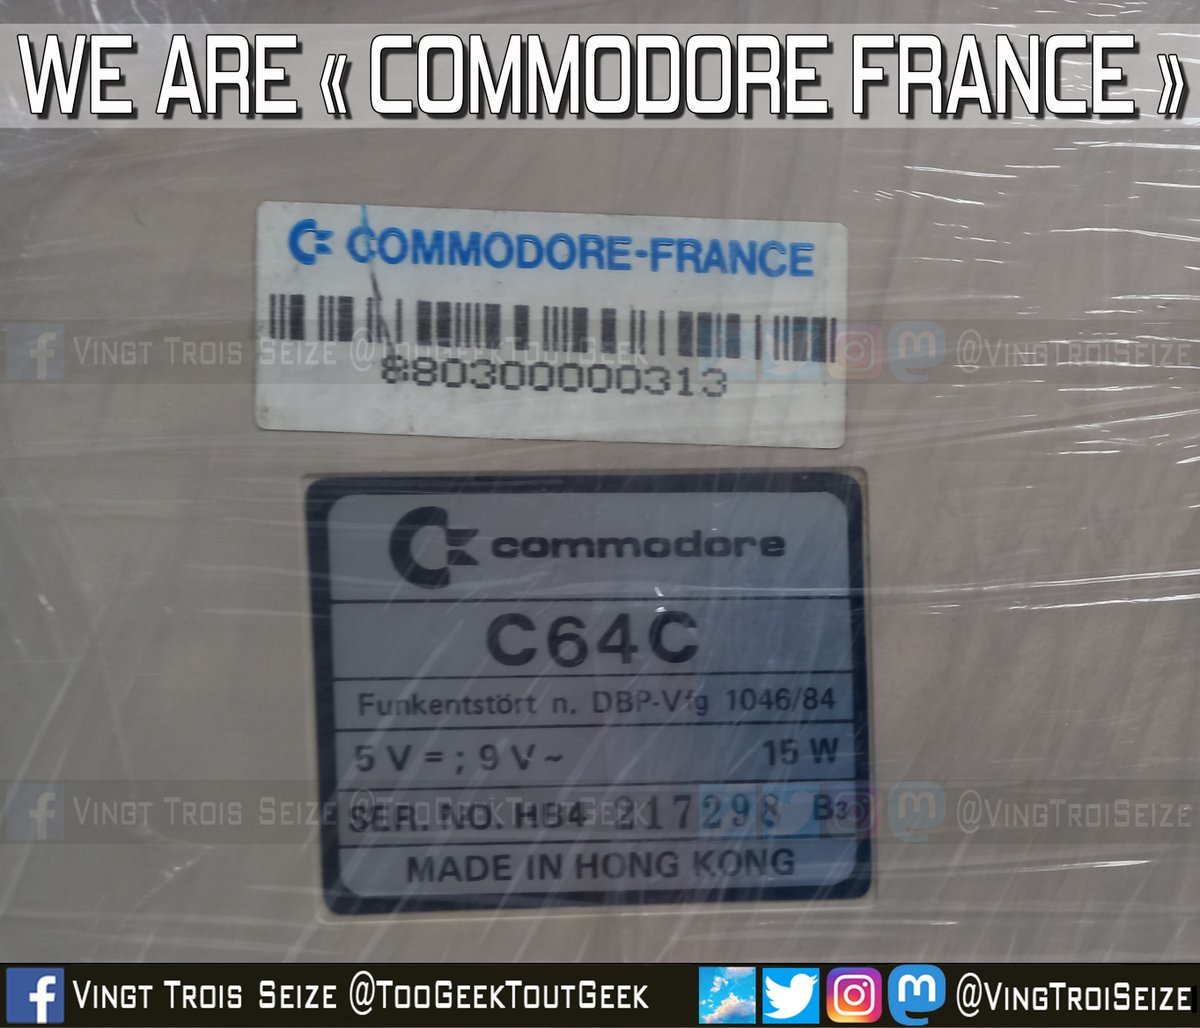 Yeppa, one of our C64C was an officially registered computer by #CommodoreFrance 🇫🇷! 🥳

Ok, now with this sticker, we don't know if this gives him any additional exceptional abilities 🤣

#commodore #CBM  #C64 #C64C #8bit #retrocomputer #retrogaming #videogames #80s #90s #Geek